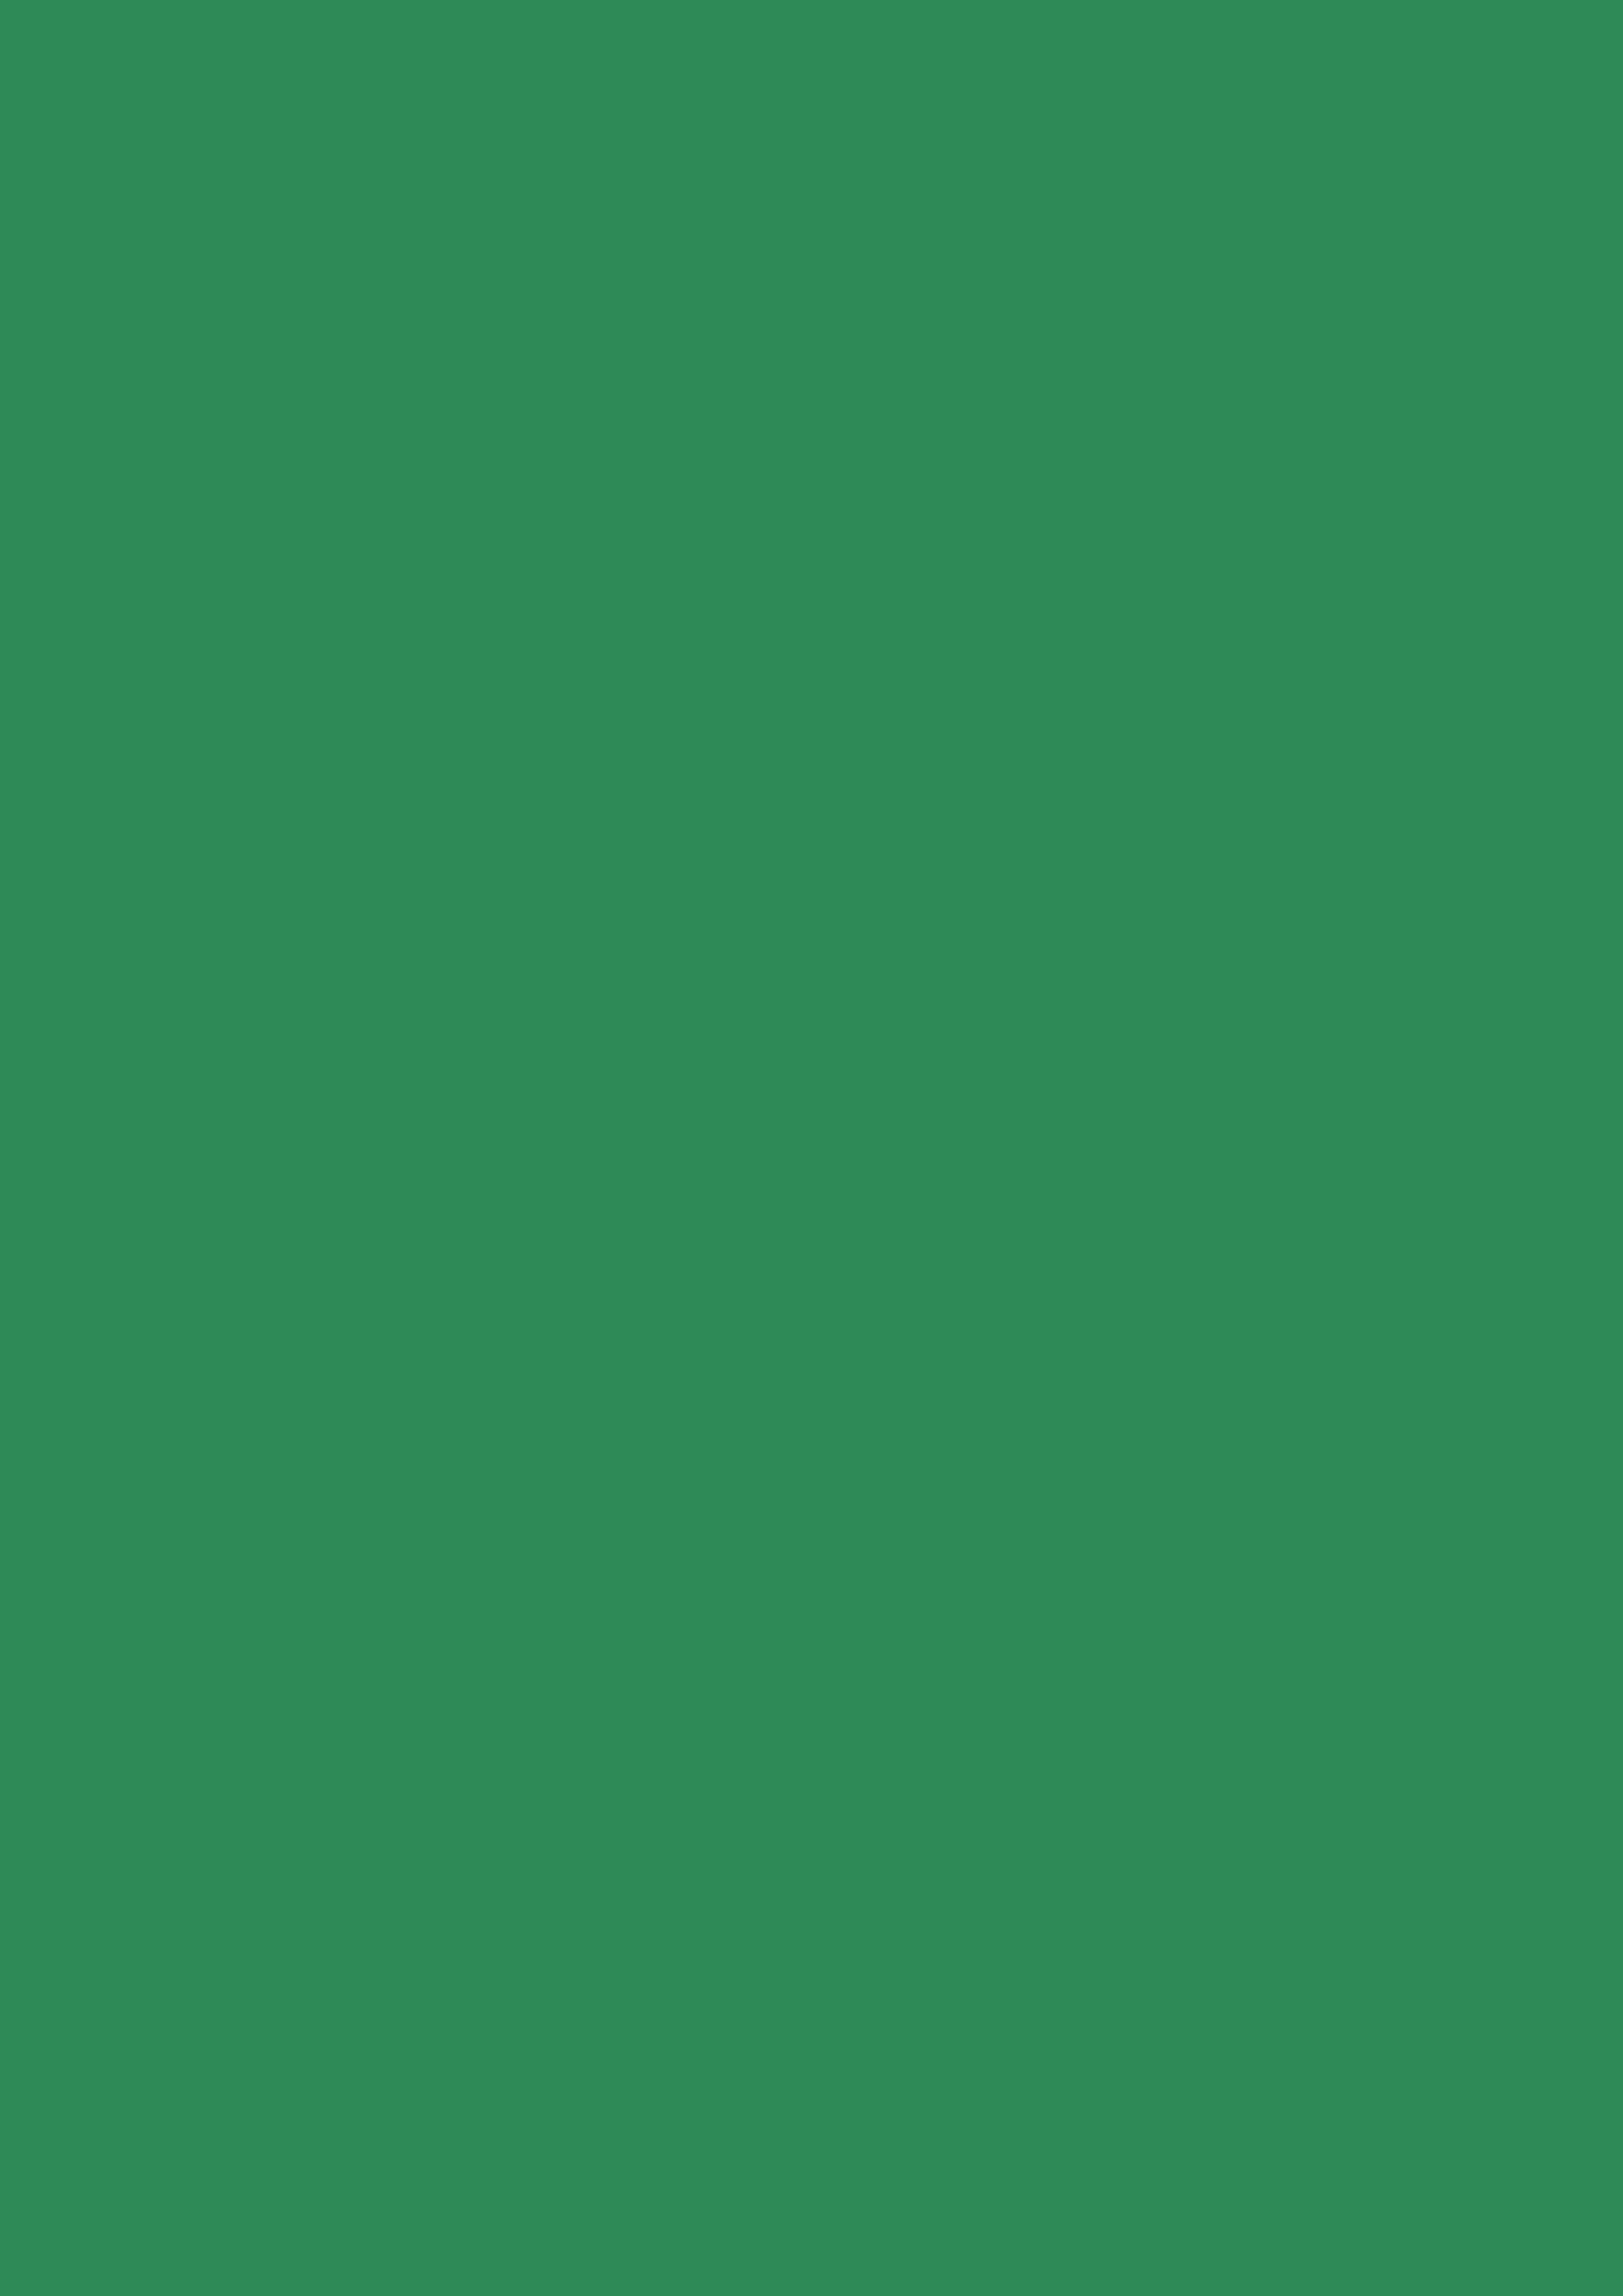 2480x3508 Sea Green Solid Color Background